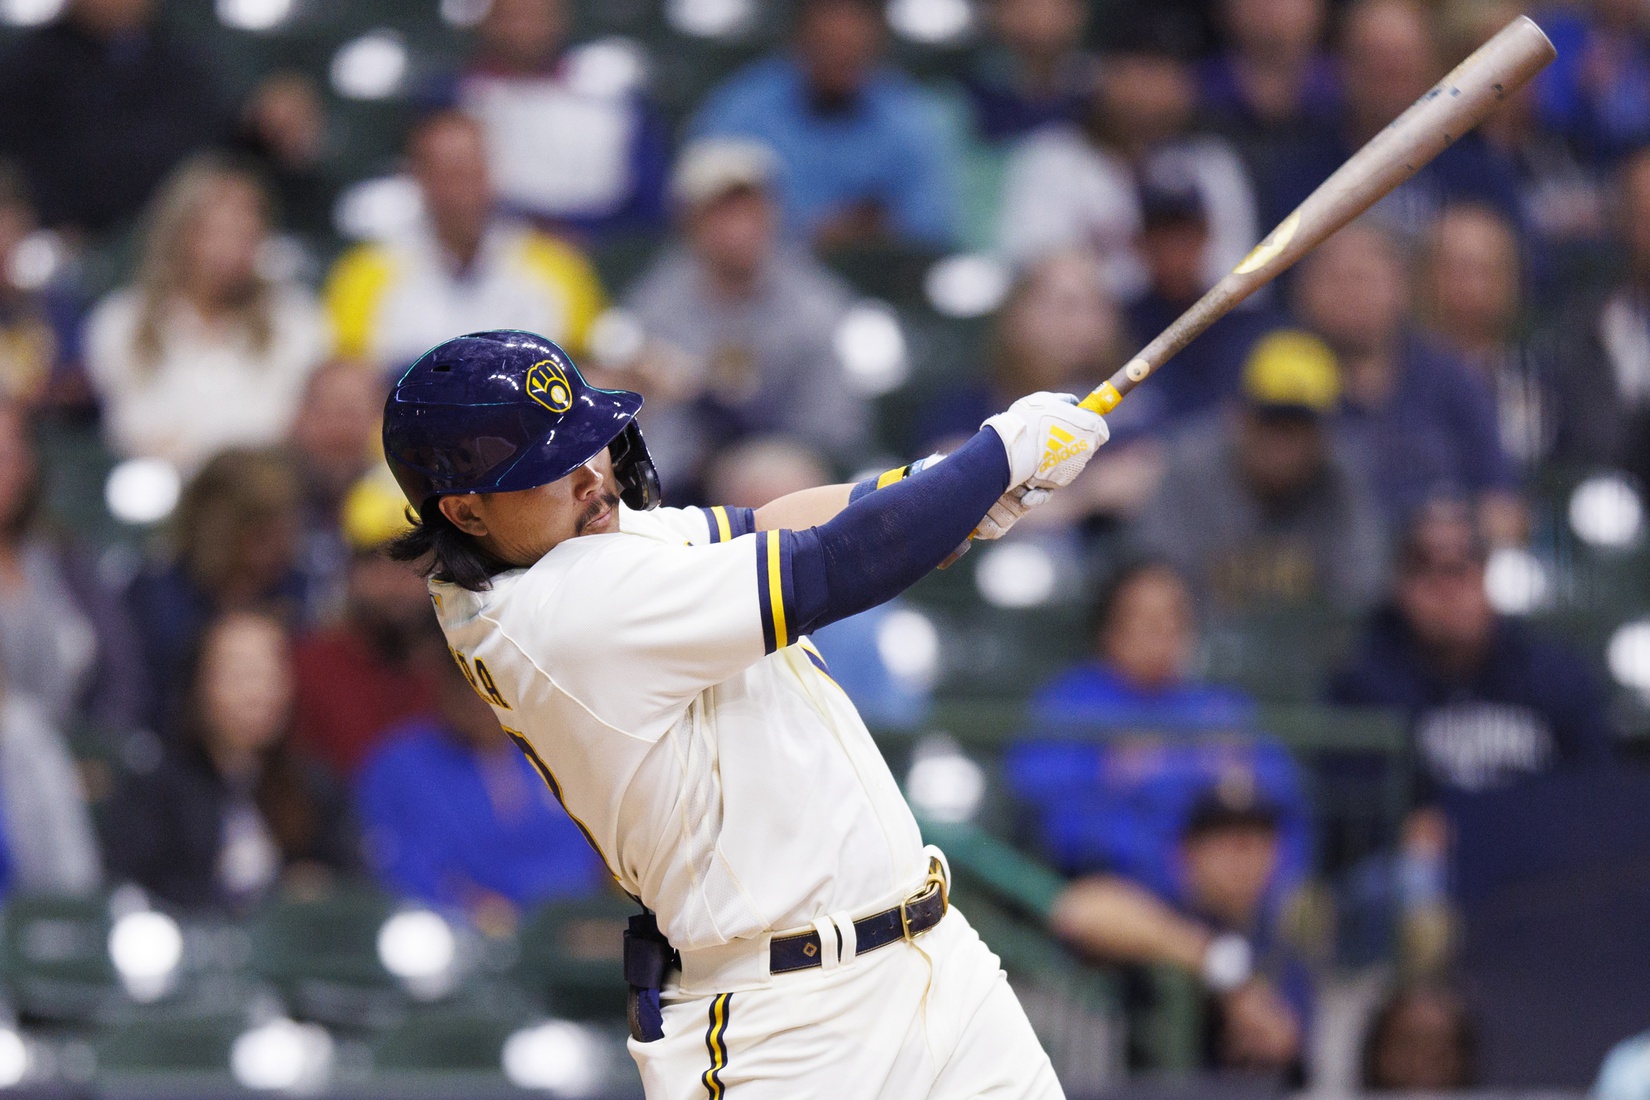 Voit Signing Affects Hiura's Role in 2023 Brewers